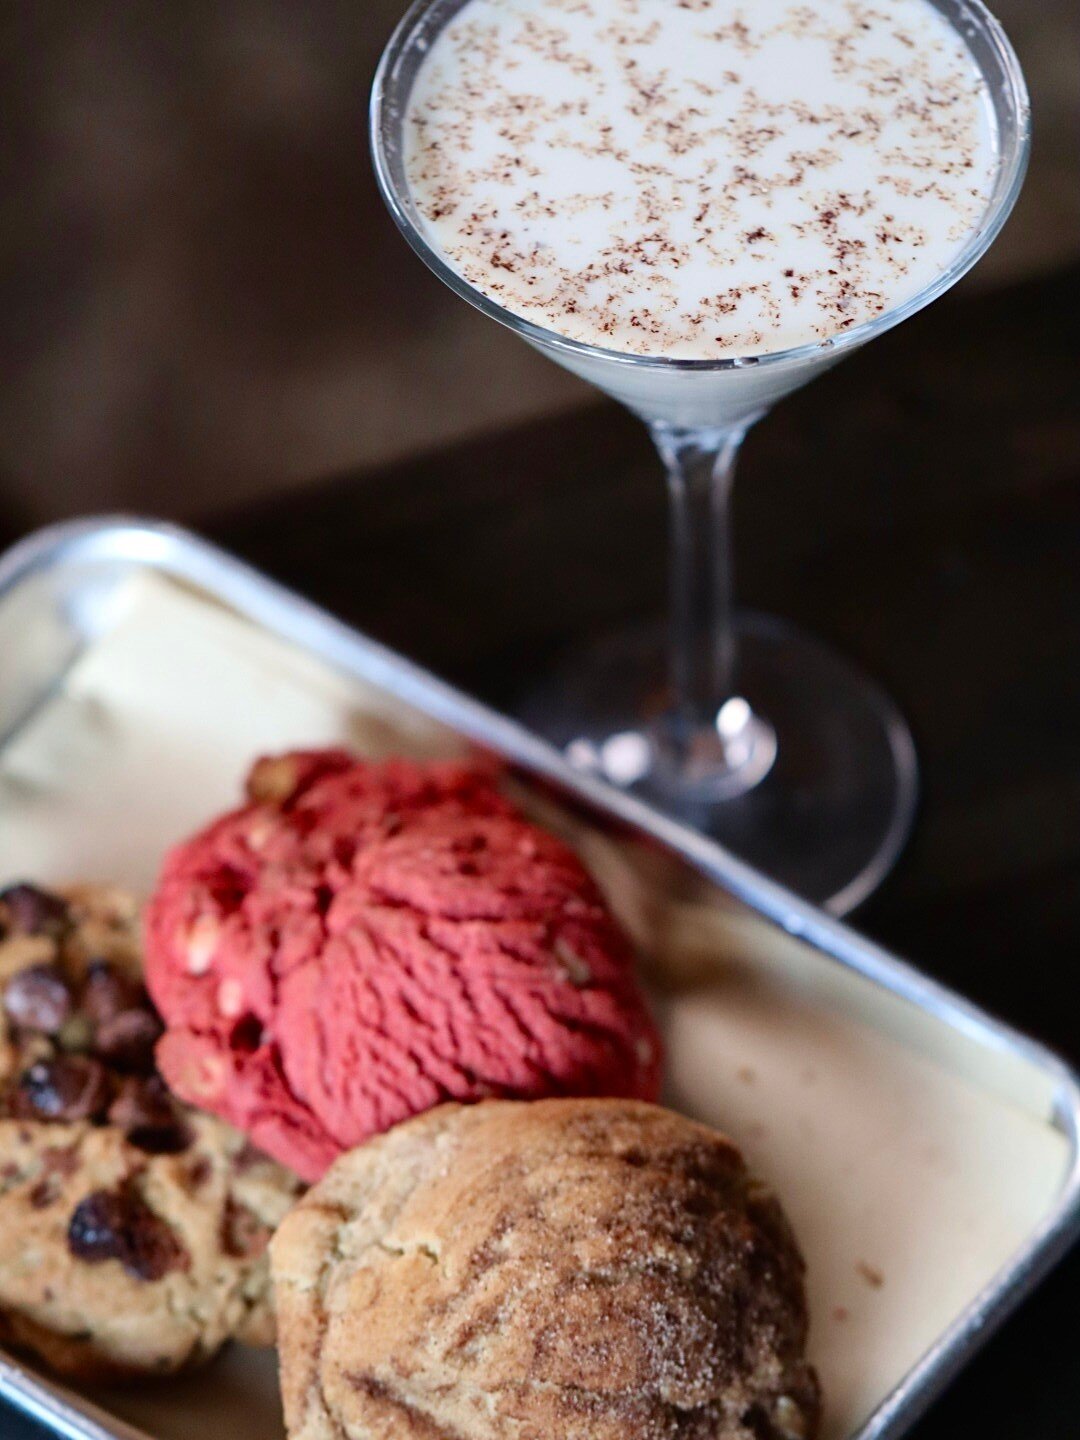 Leaving Santa a special treat this year: Barnett's Cookies &amp; Milk Cocktail with locally baked @milkbottlecookies! 🍪🎄
ㅤ
Celebrate with one (or two) this Sunday with us during Brunch until 2pm!
ㅤ
HOLIDAY HOURS:
🧑&zwj;🎄Christmas Eve, December 24